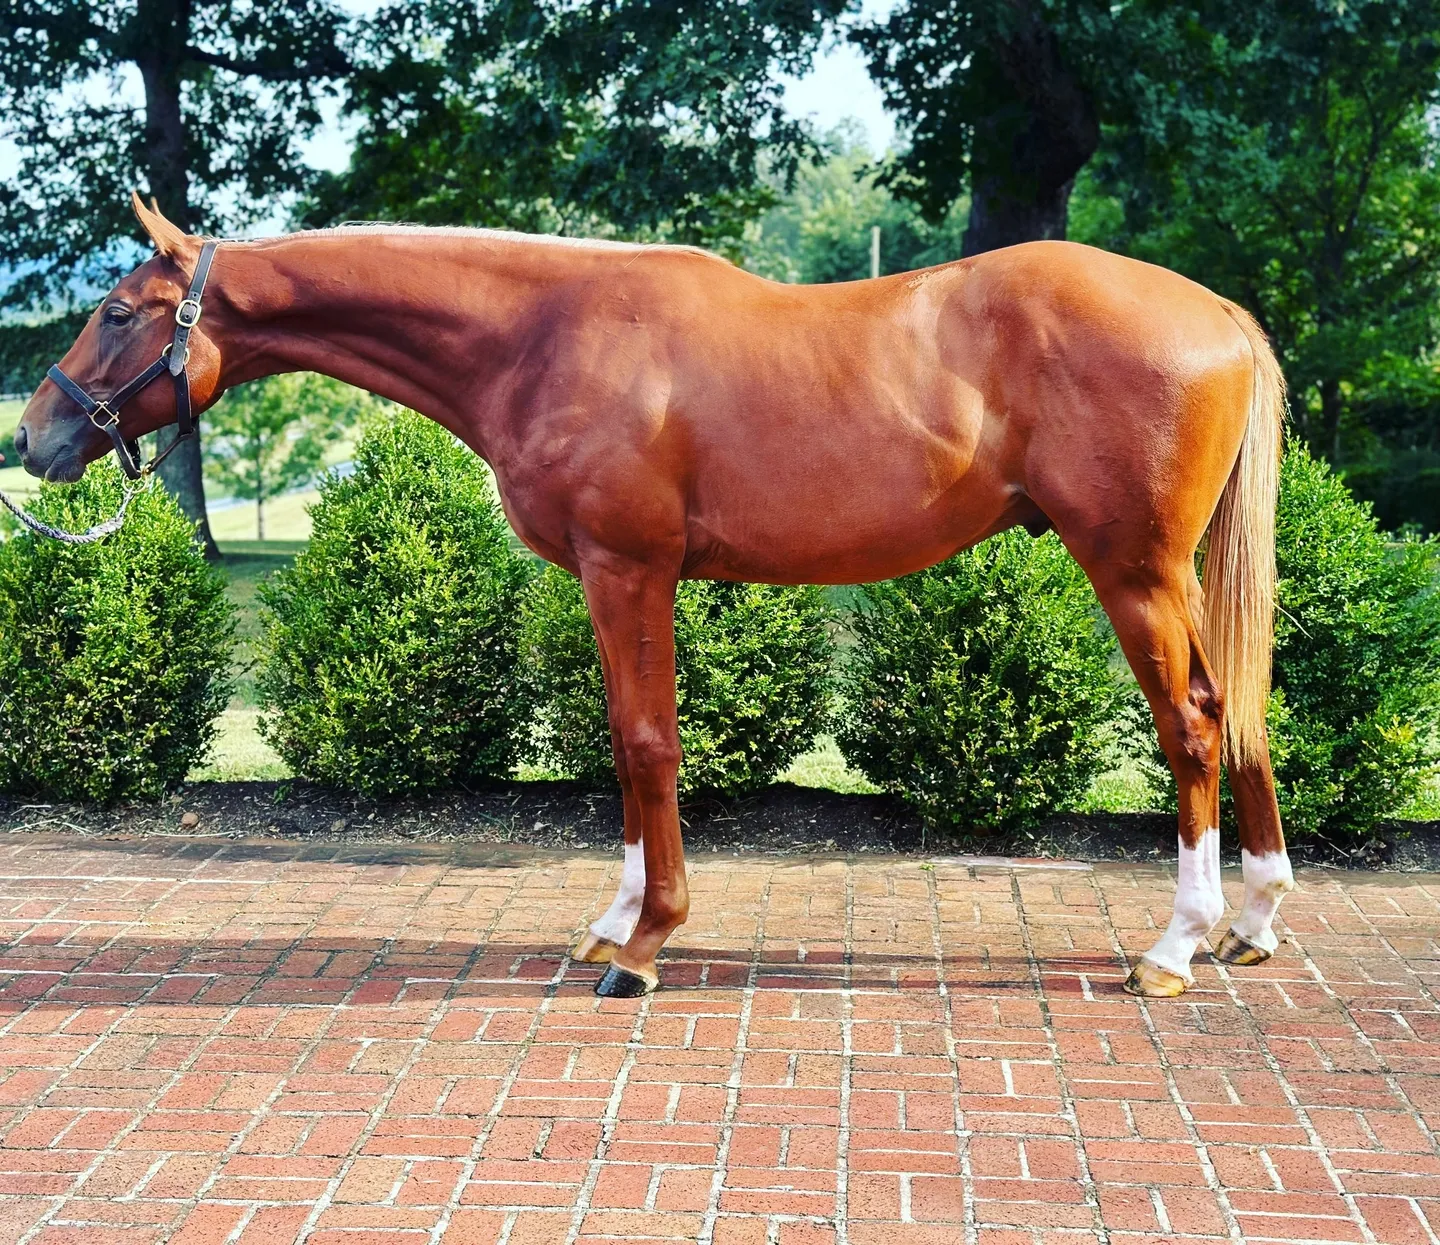 A horse standing on top of a brick path.